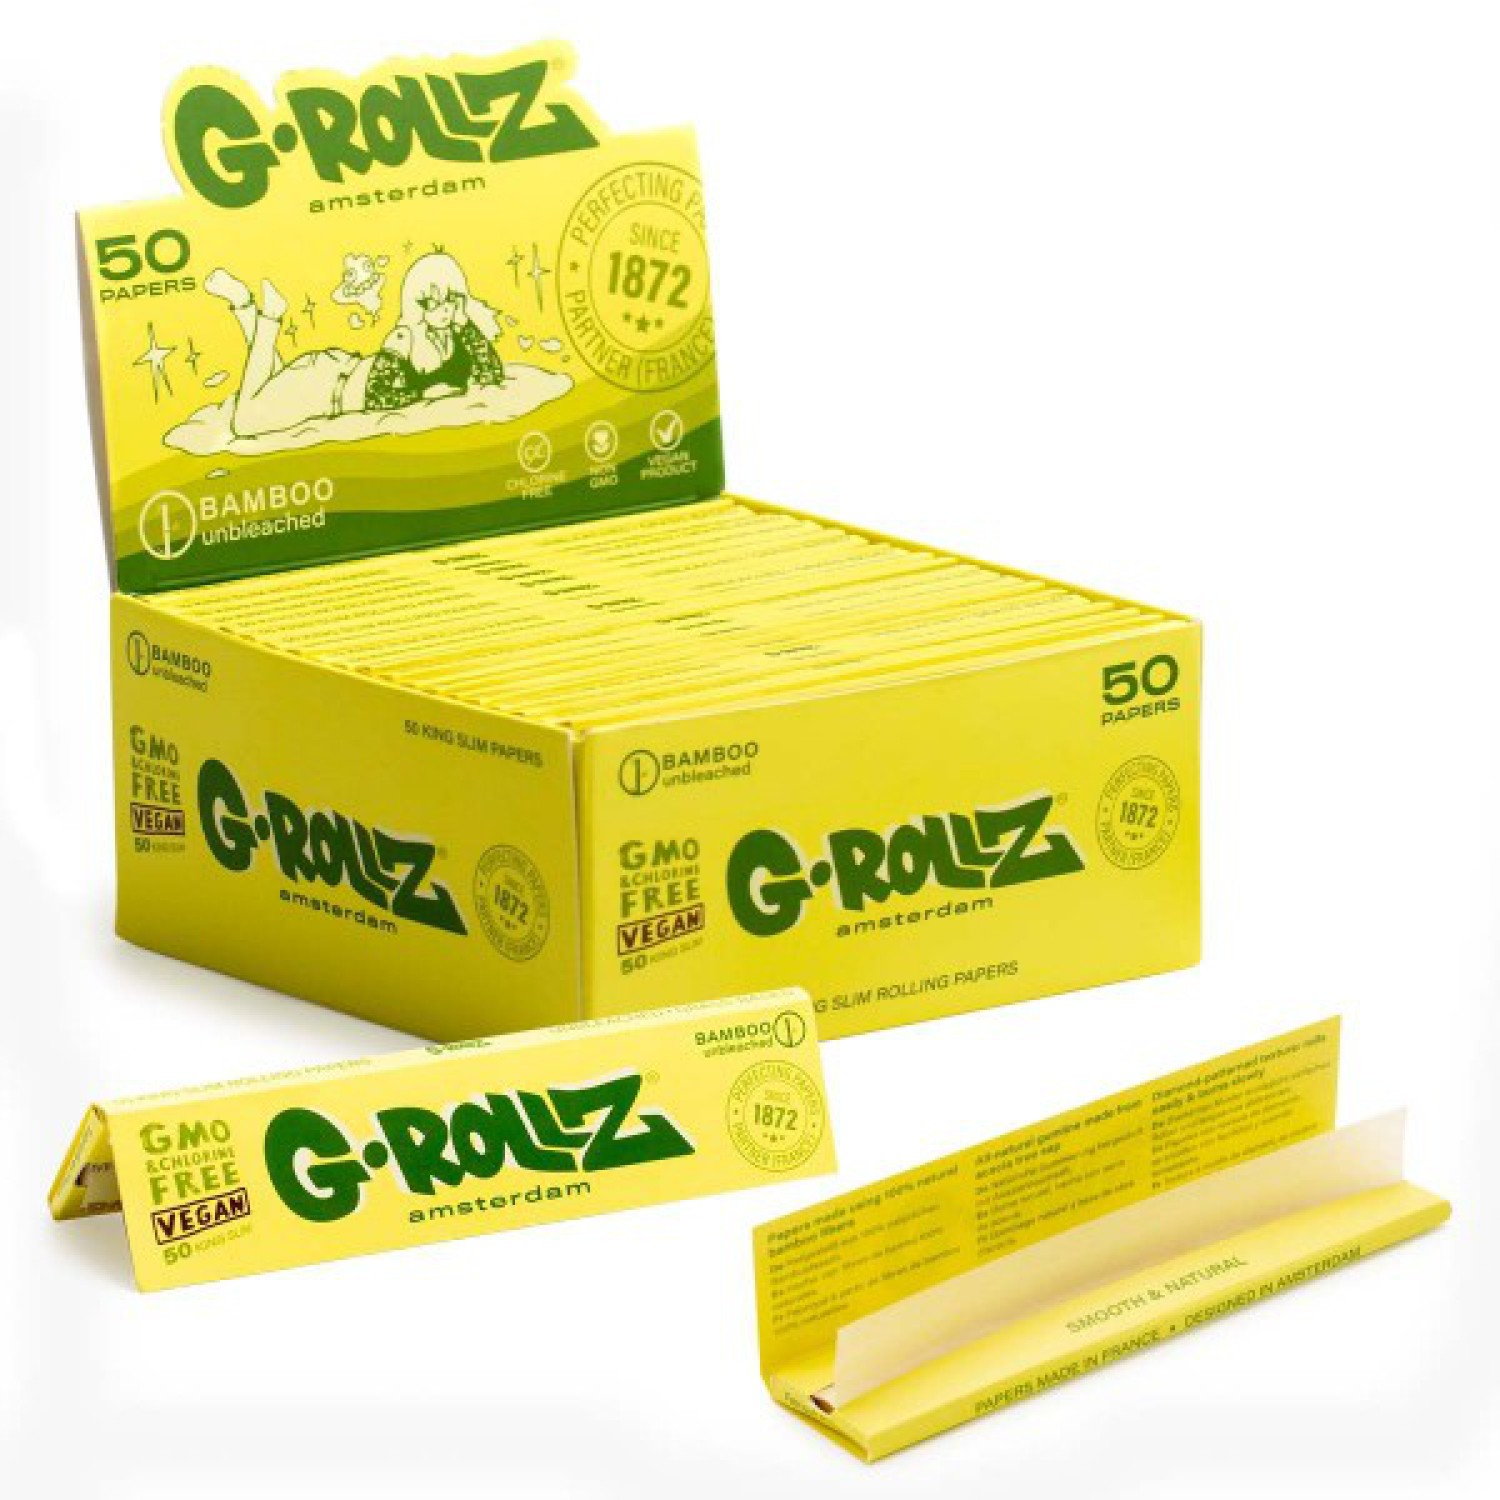 G-ROLLZ,Papers KS "Bamboo Unbleached " VE-50